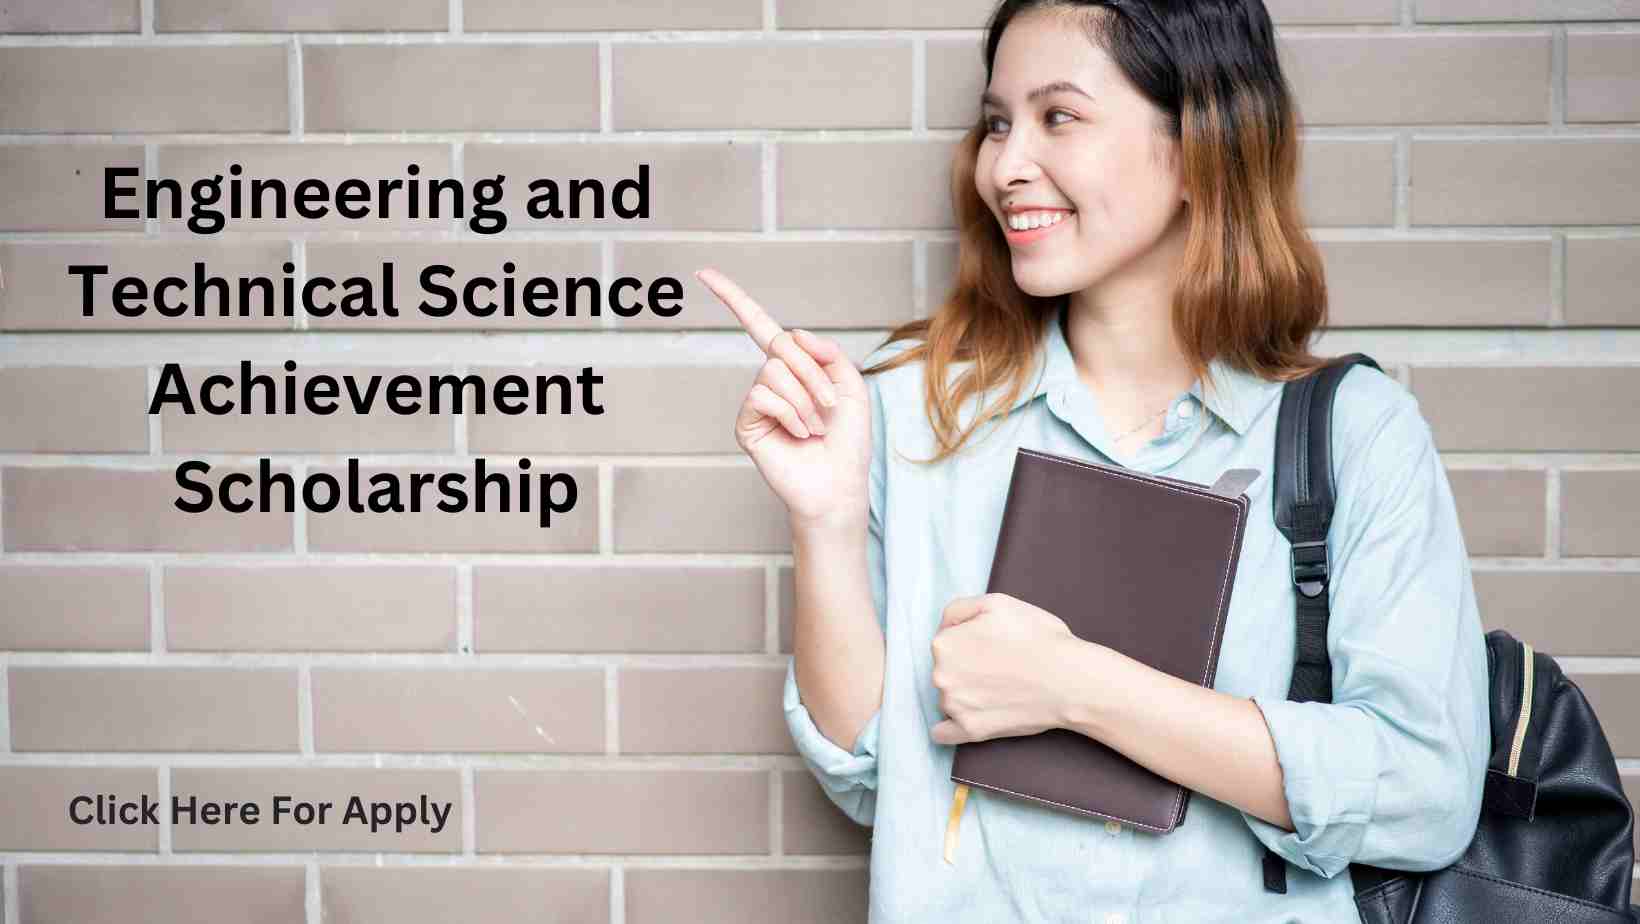 Engineering and Technical Science Achievement Scholarship